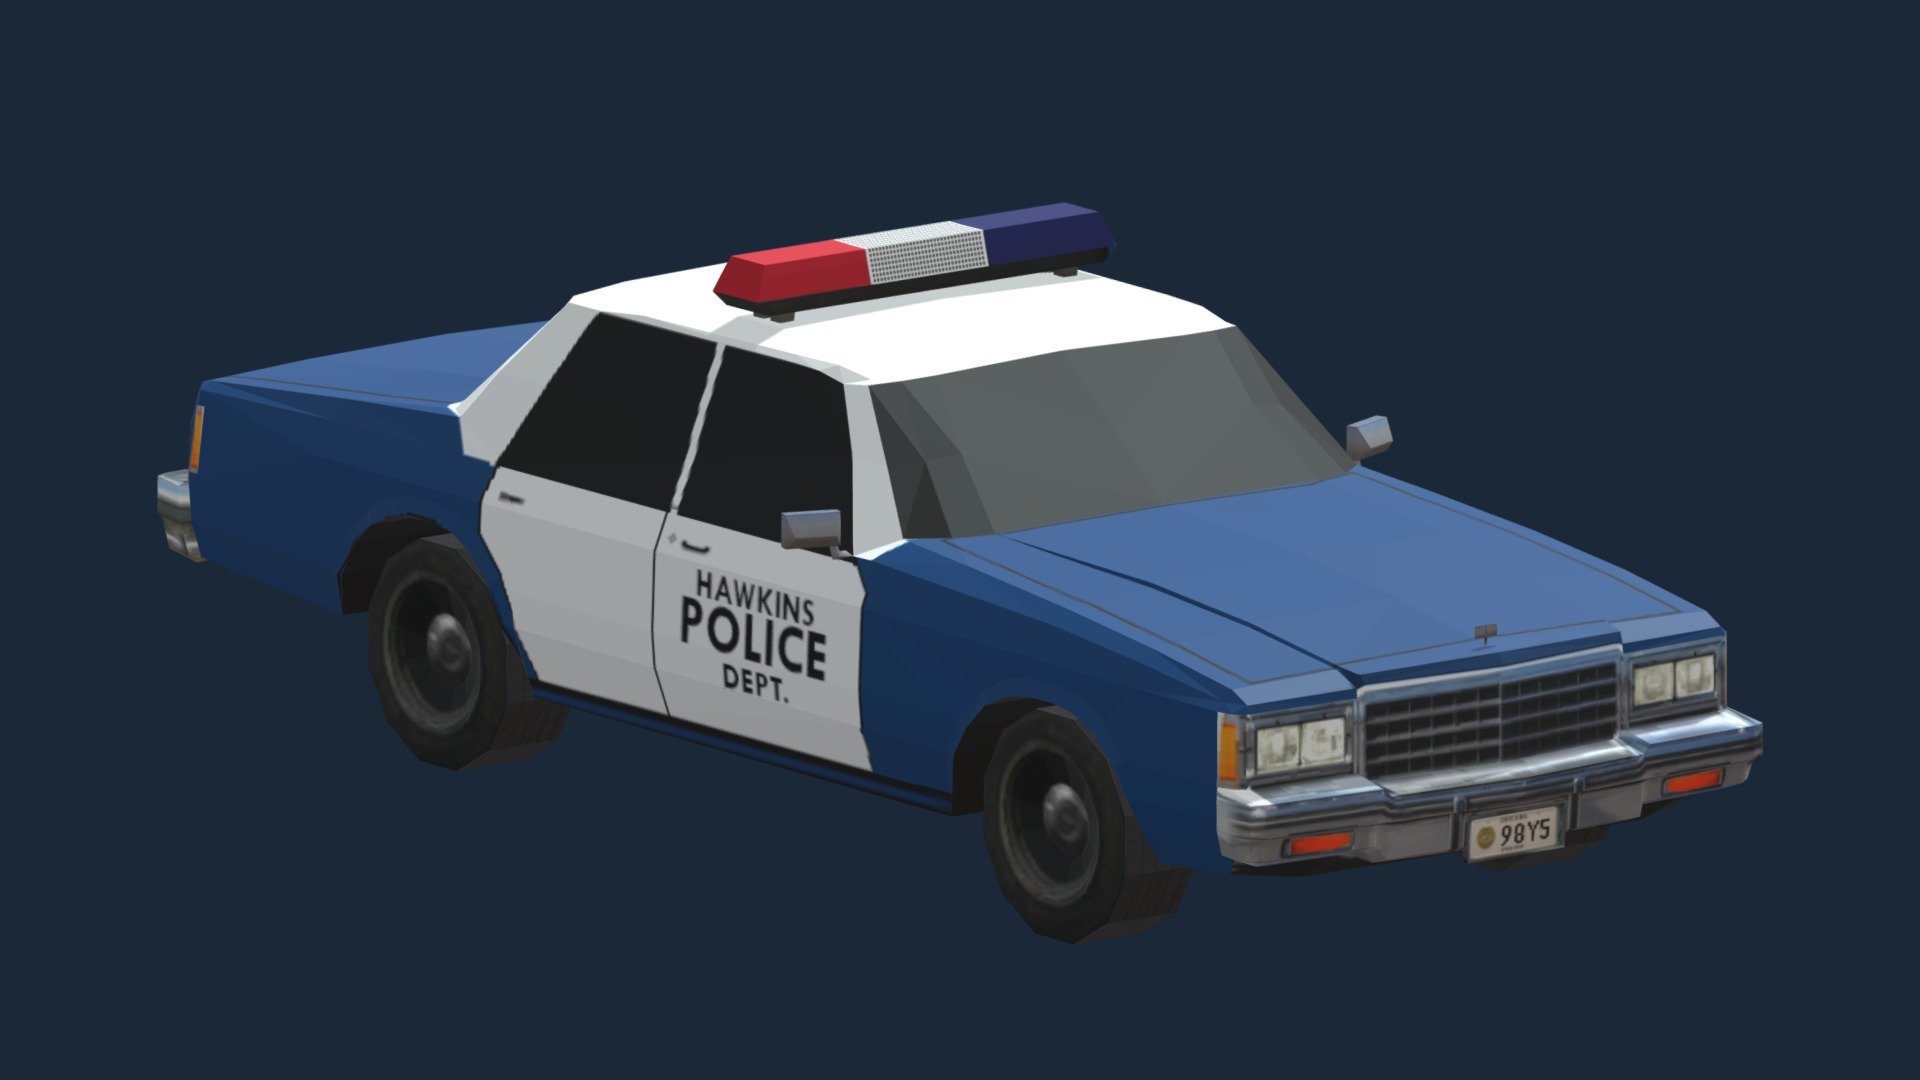 Hawkins Police Car
As seen on the Netflix show Stranger Things.

Vehicle of choice for Hawkins' finest! Original asset created by Archie Cuntingham - Caprice Police blue version. Used with permission by the author. I modified his textures/UV maps a bit to give more fidelity to the Hawkins logo and gave it a darker blue livery.

This is an was created for use in the game Cities Skylines - here is the asset if you’d like to use it!

Modelled and textured by hand - please favorite and follow! - Hawkins Police Car - Download Free 3D model by Sea Land Air (@sealandair) 3d model